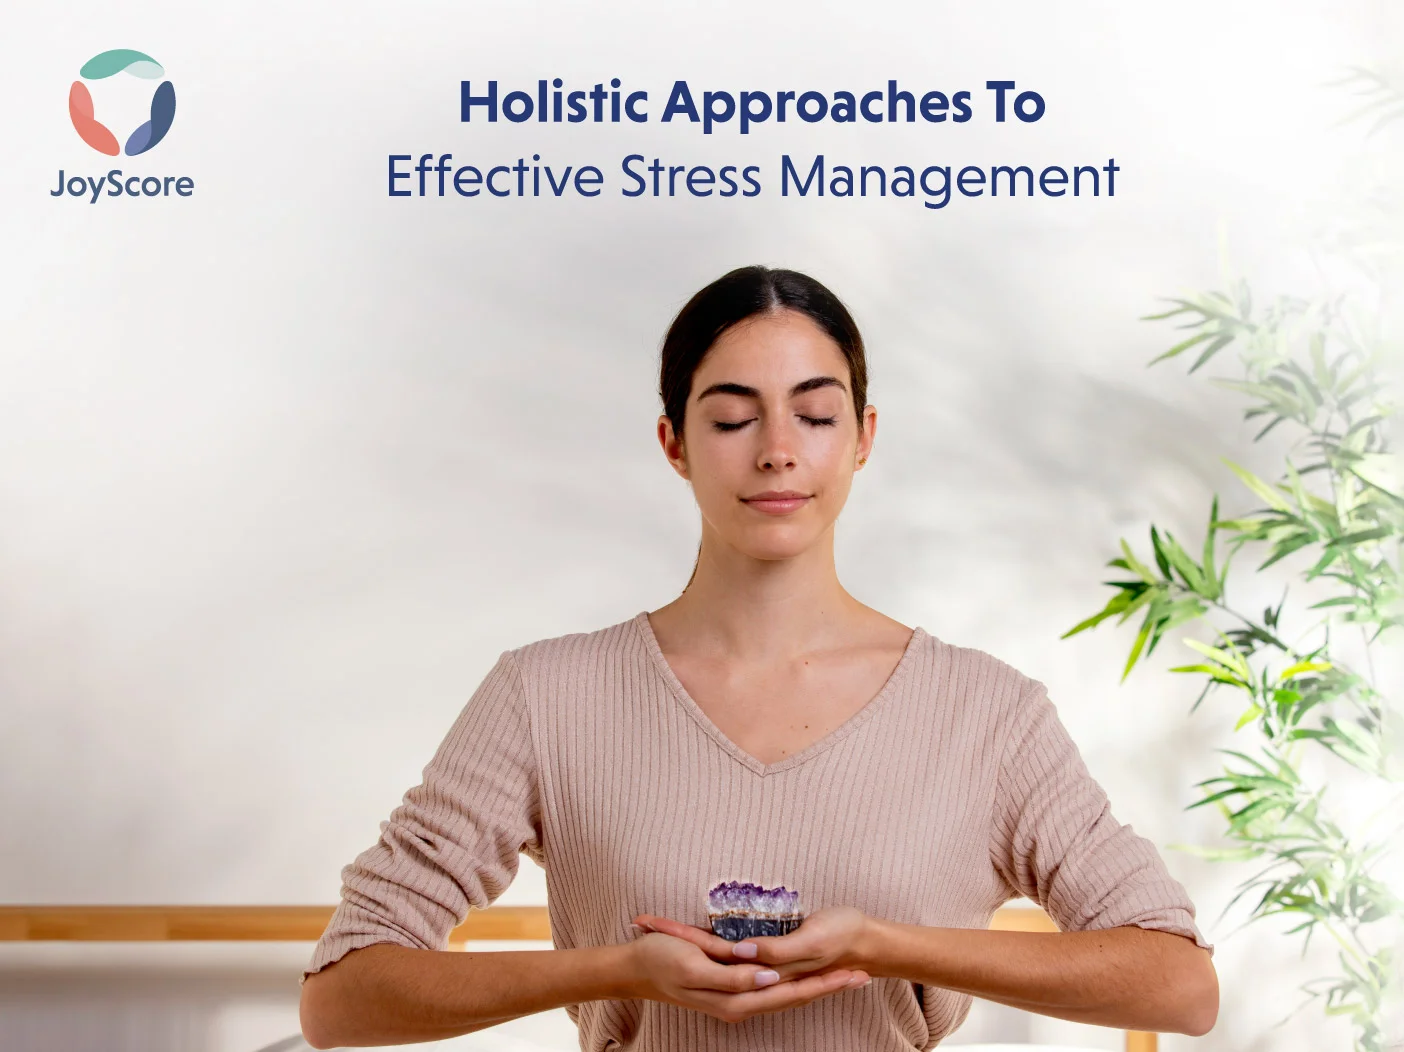 Holistic Approaches To Effective Stress Management